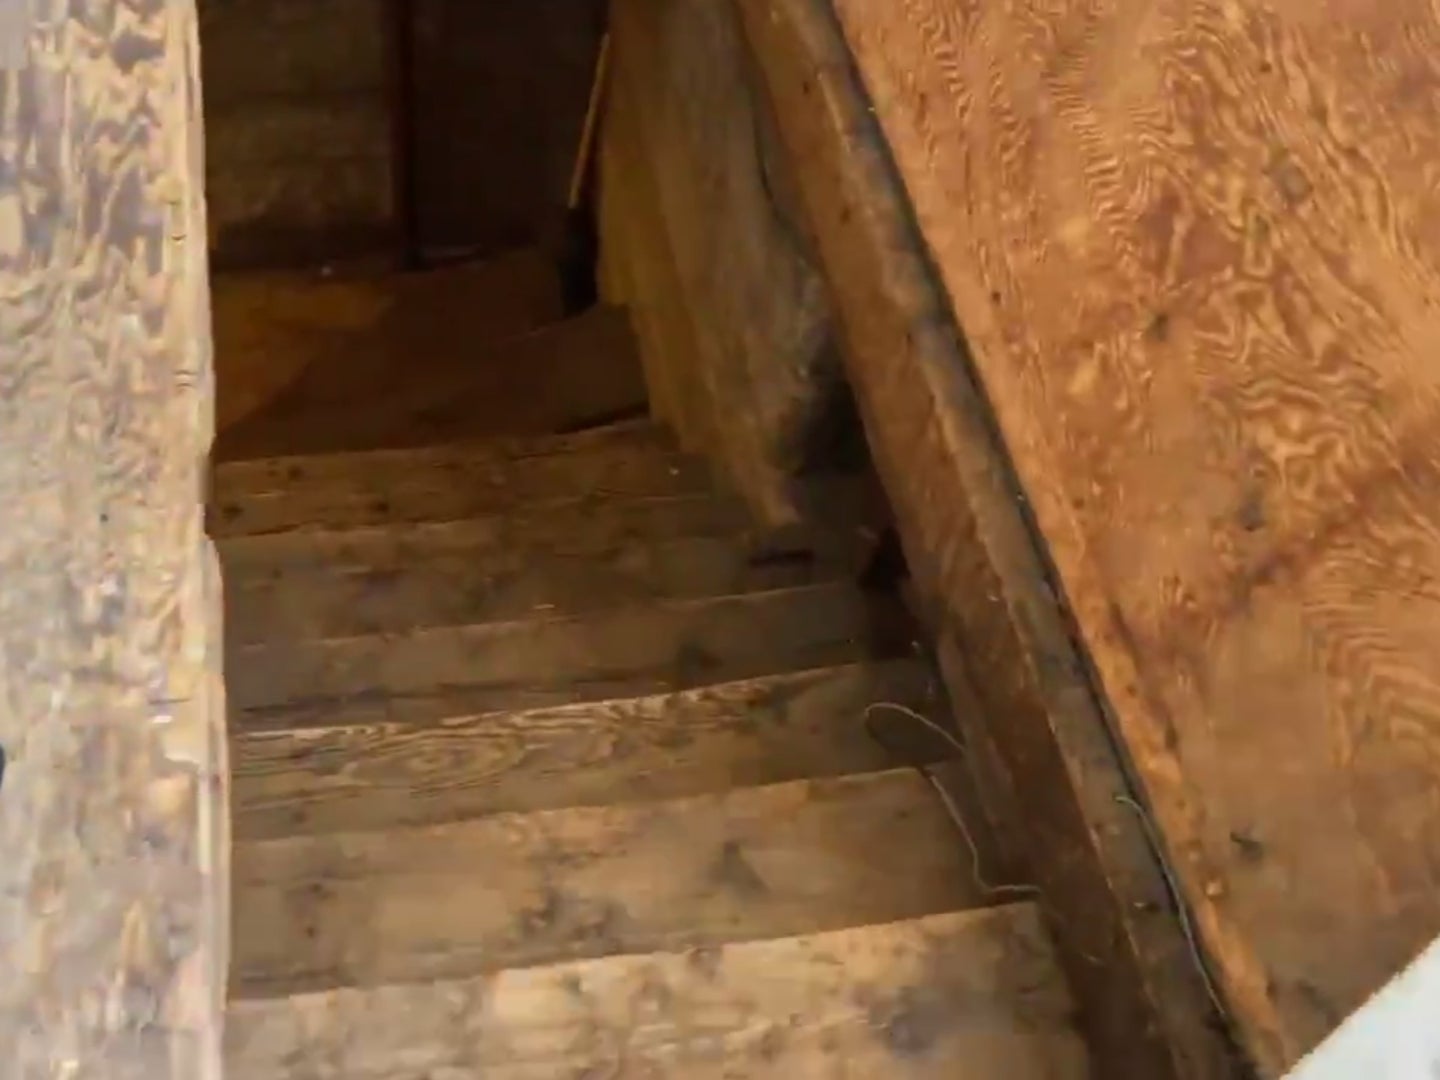 Footage of the basement that Adam Fox lived in. Mr Fox has been accused of plotting to kidnap Michigan governor Gretchen Whitmer